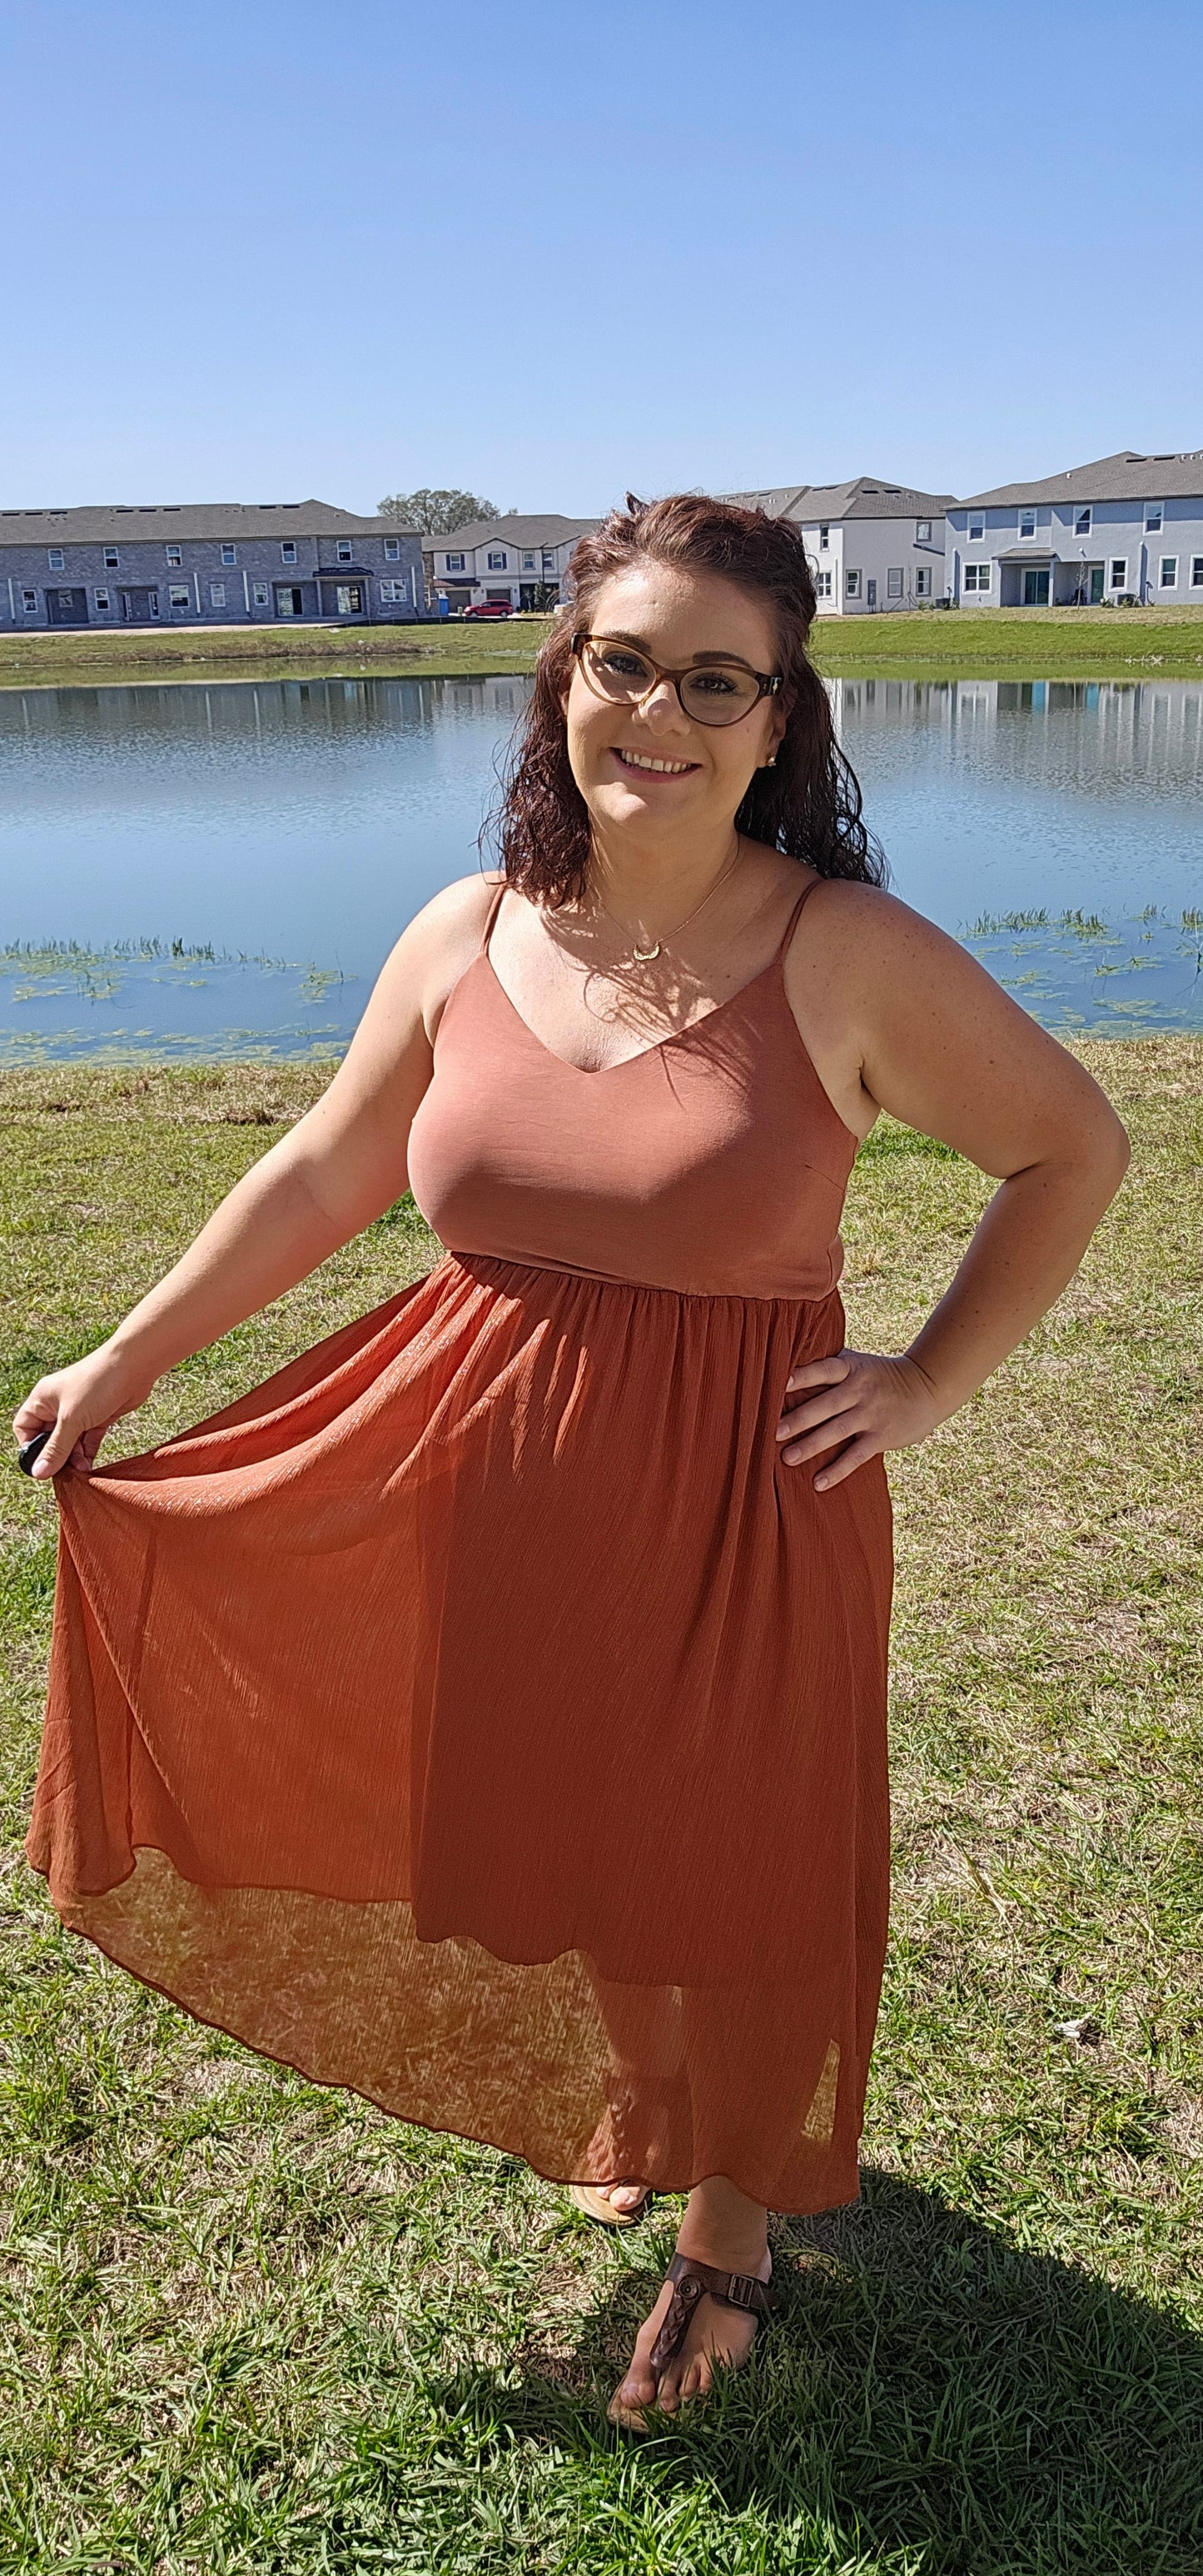 Look stunning and stay comfortable in the "Inaya Rust Modal Cami Midi Dress" with a hint of shimmer! With its adjustable shoulder strap and airy open back, this dress offers the perfect mix of style and breathability. And with a rayon lining, you can strut your stuff in divine comfort and style. You'll want to wear it everywhere! Sizes small through large.